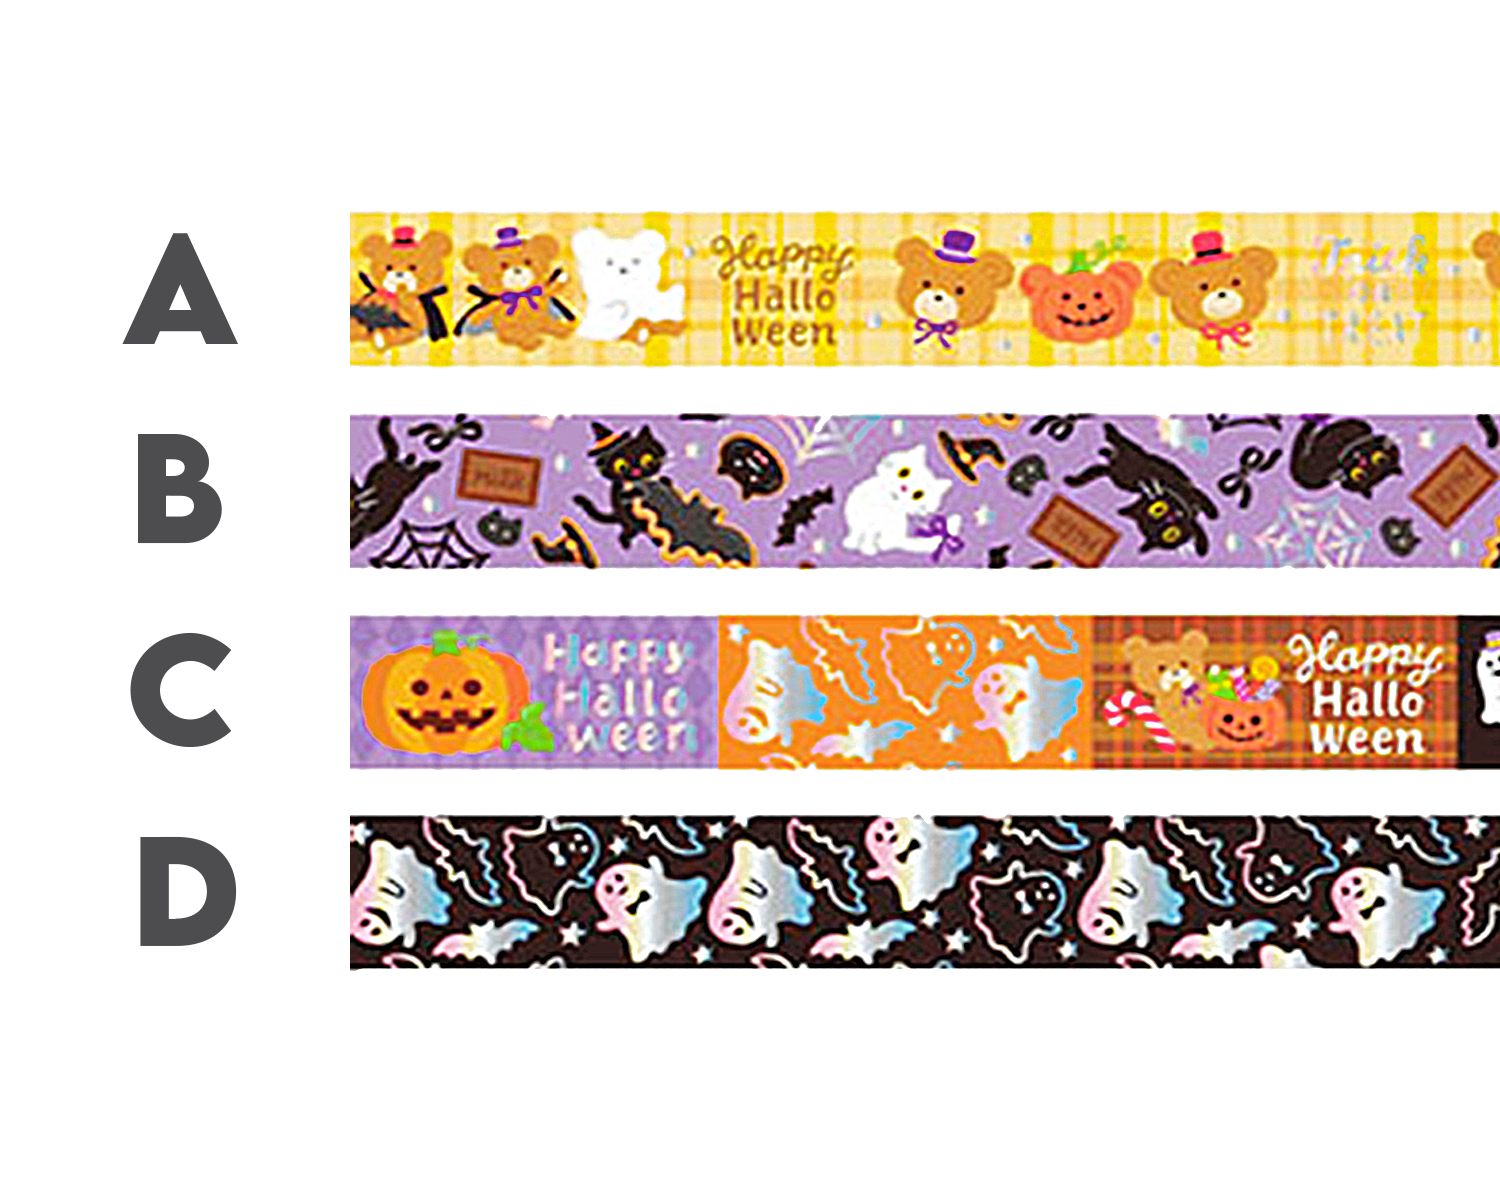 amifa Halloween Foil Masking Tape 15mm×3m Halloween Collection